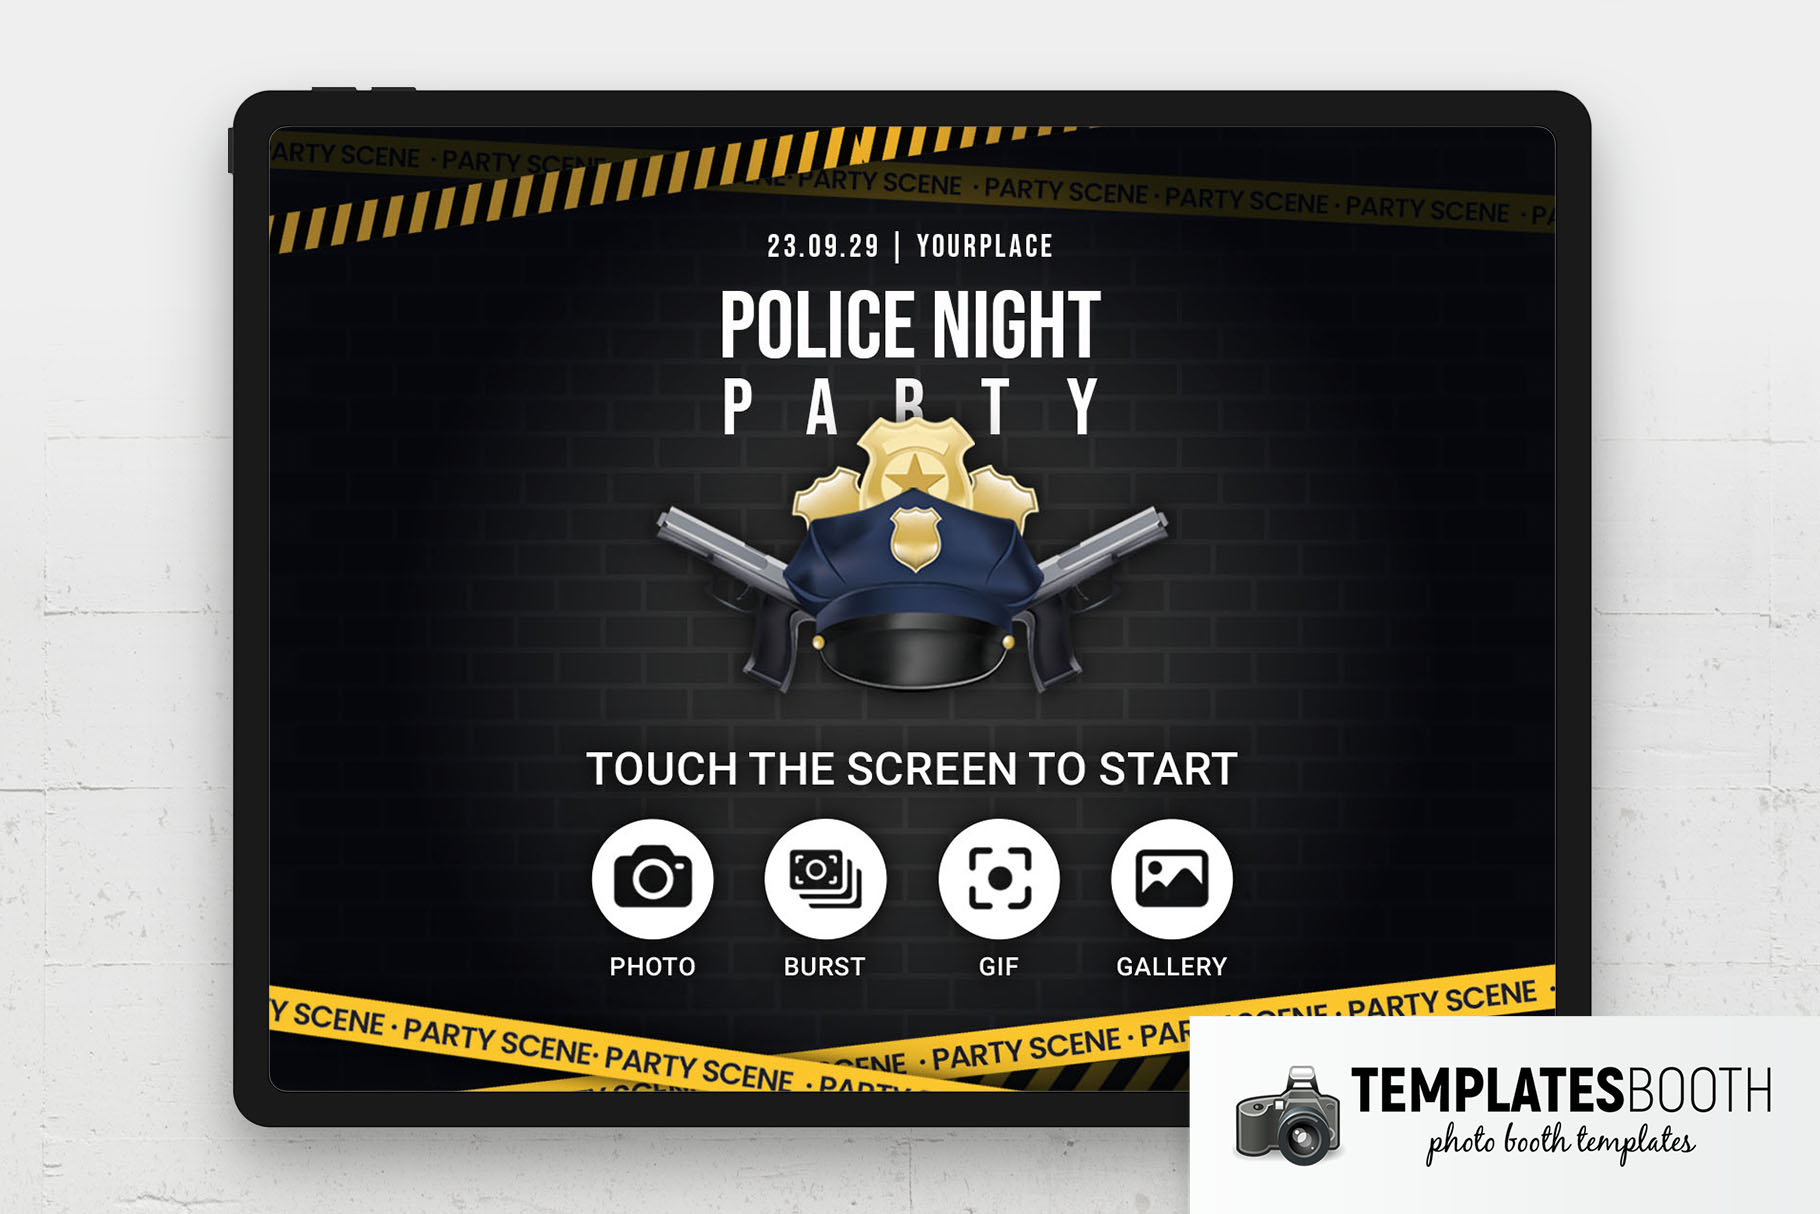 Police Party Photo Booth Welcome Screen